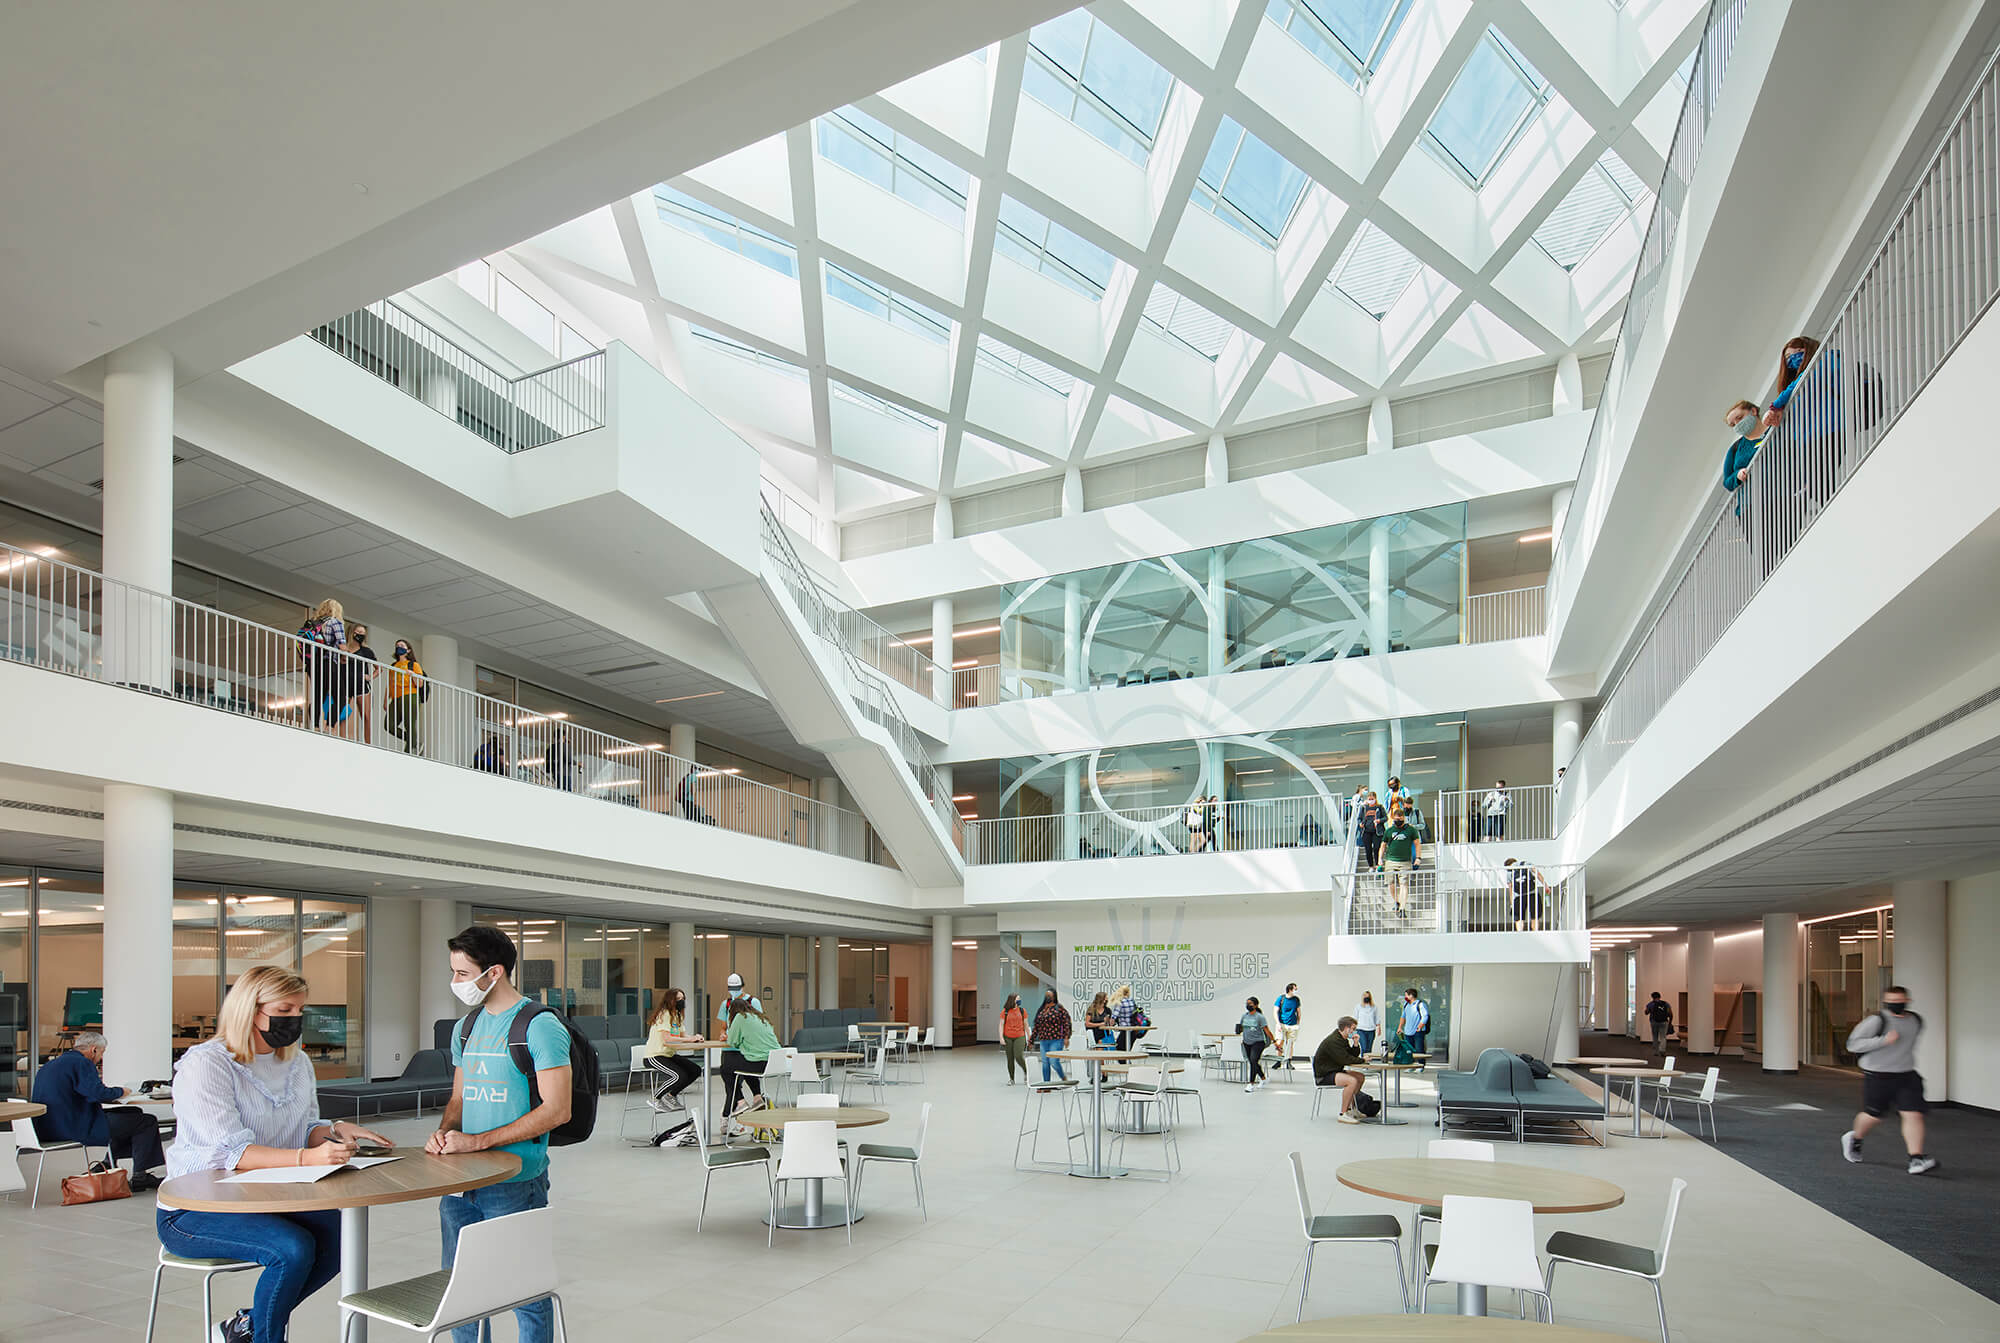 Photo showing medical students in glass atrium.